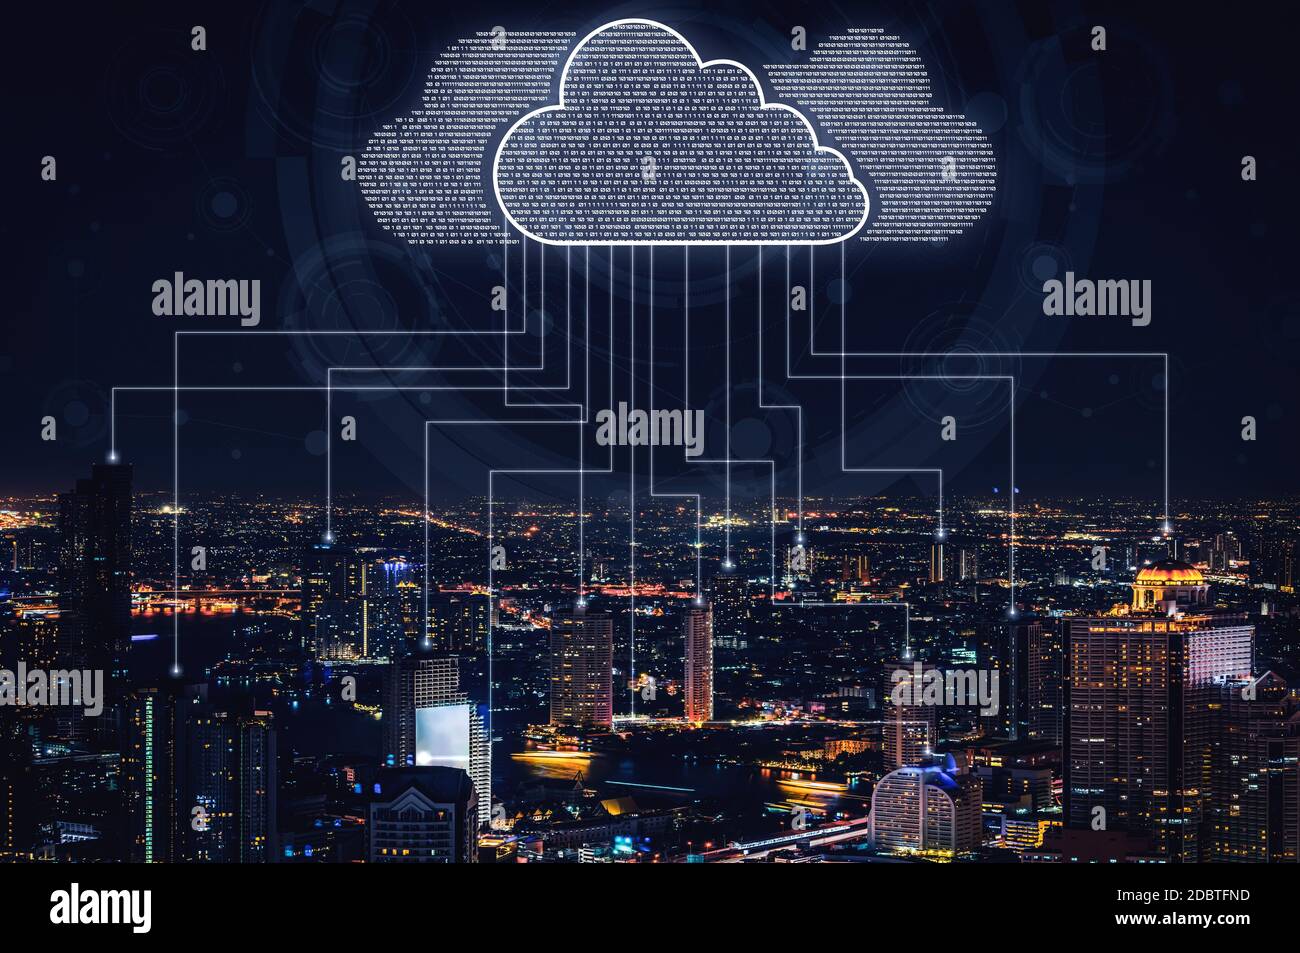 Cloud computing technology and online data storage for business network concept. Computer connects to internet server service for cloud data transfer Stock Photo